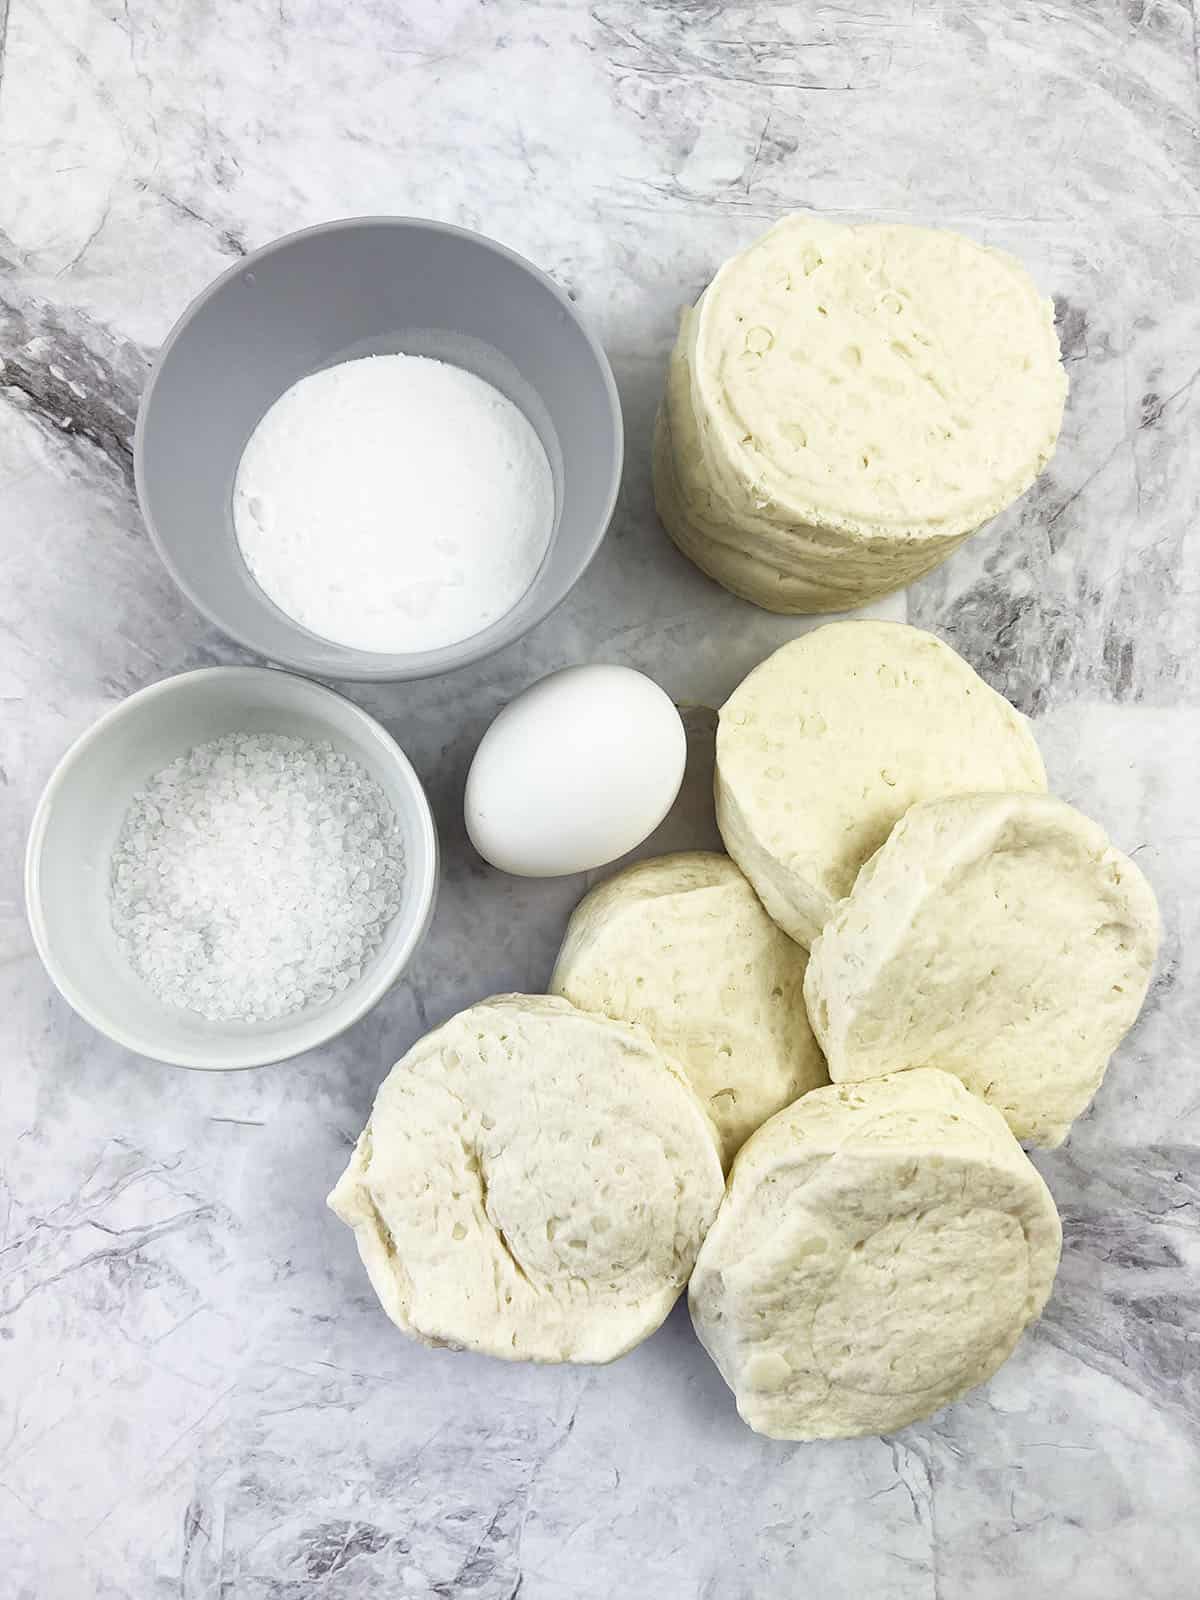 The ingredient photo showing salt, baking soda, and egg, and the biscuit dough.